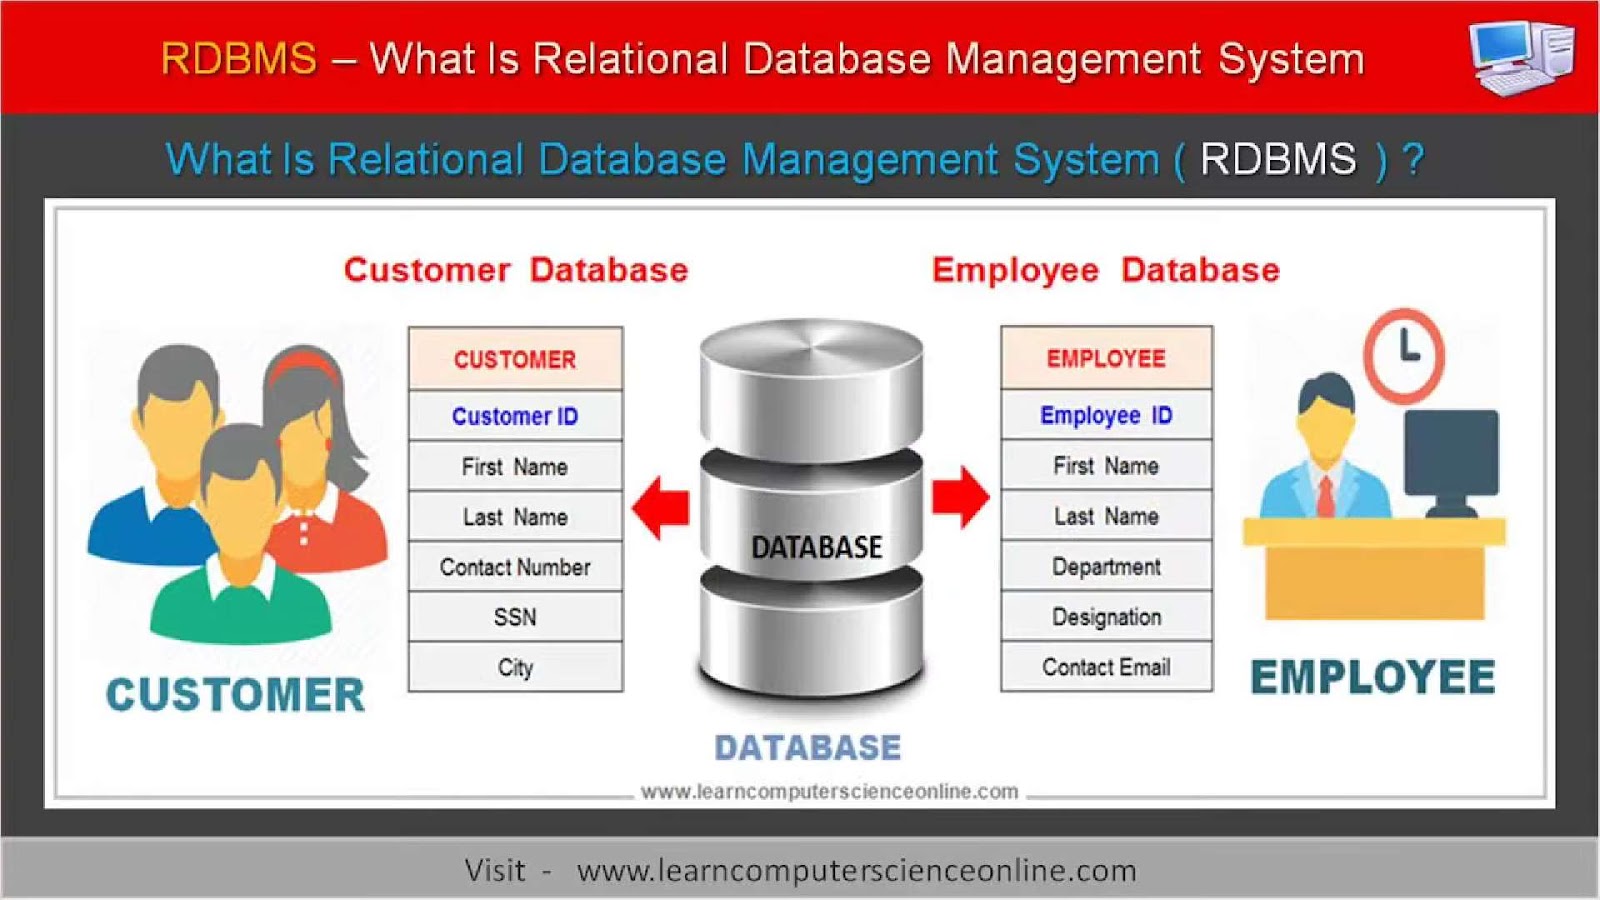 Top Database Choices in Today’s Digital Landscape